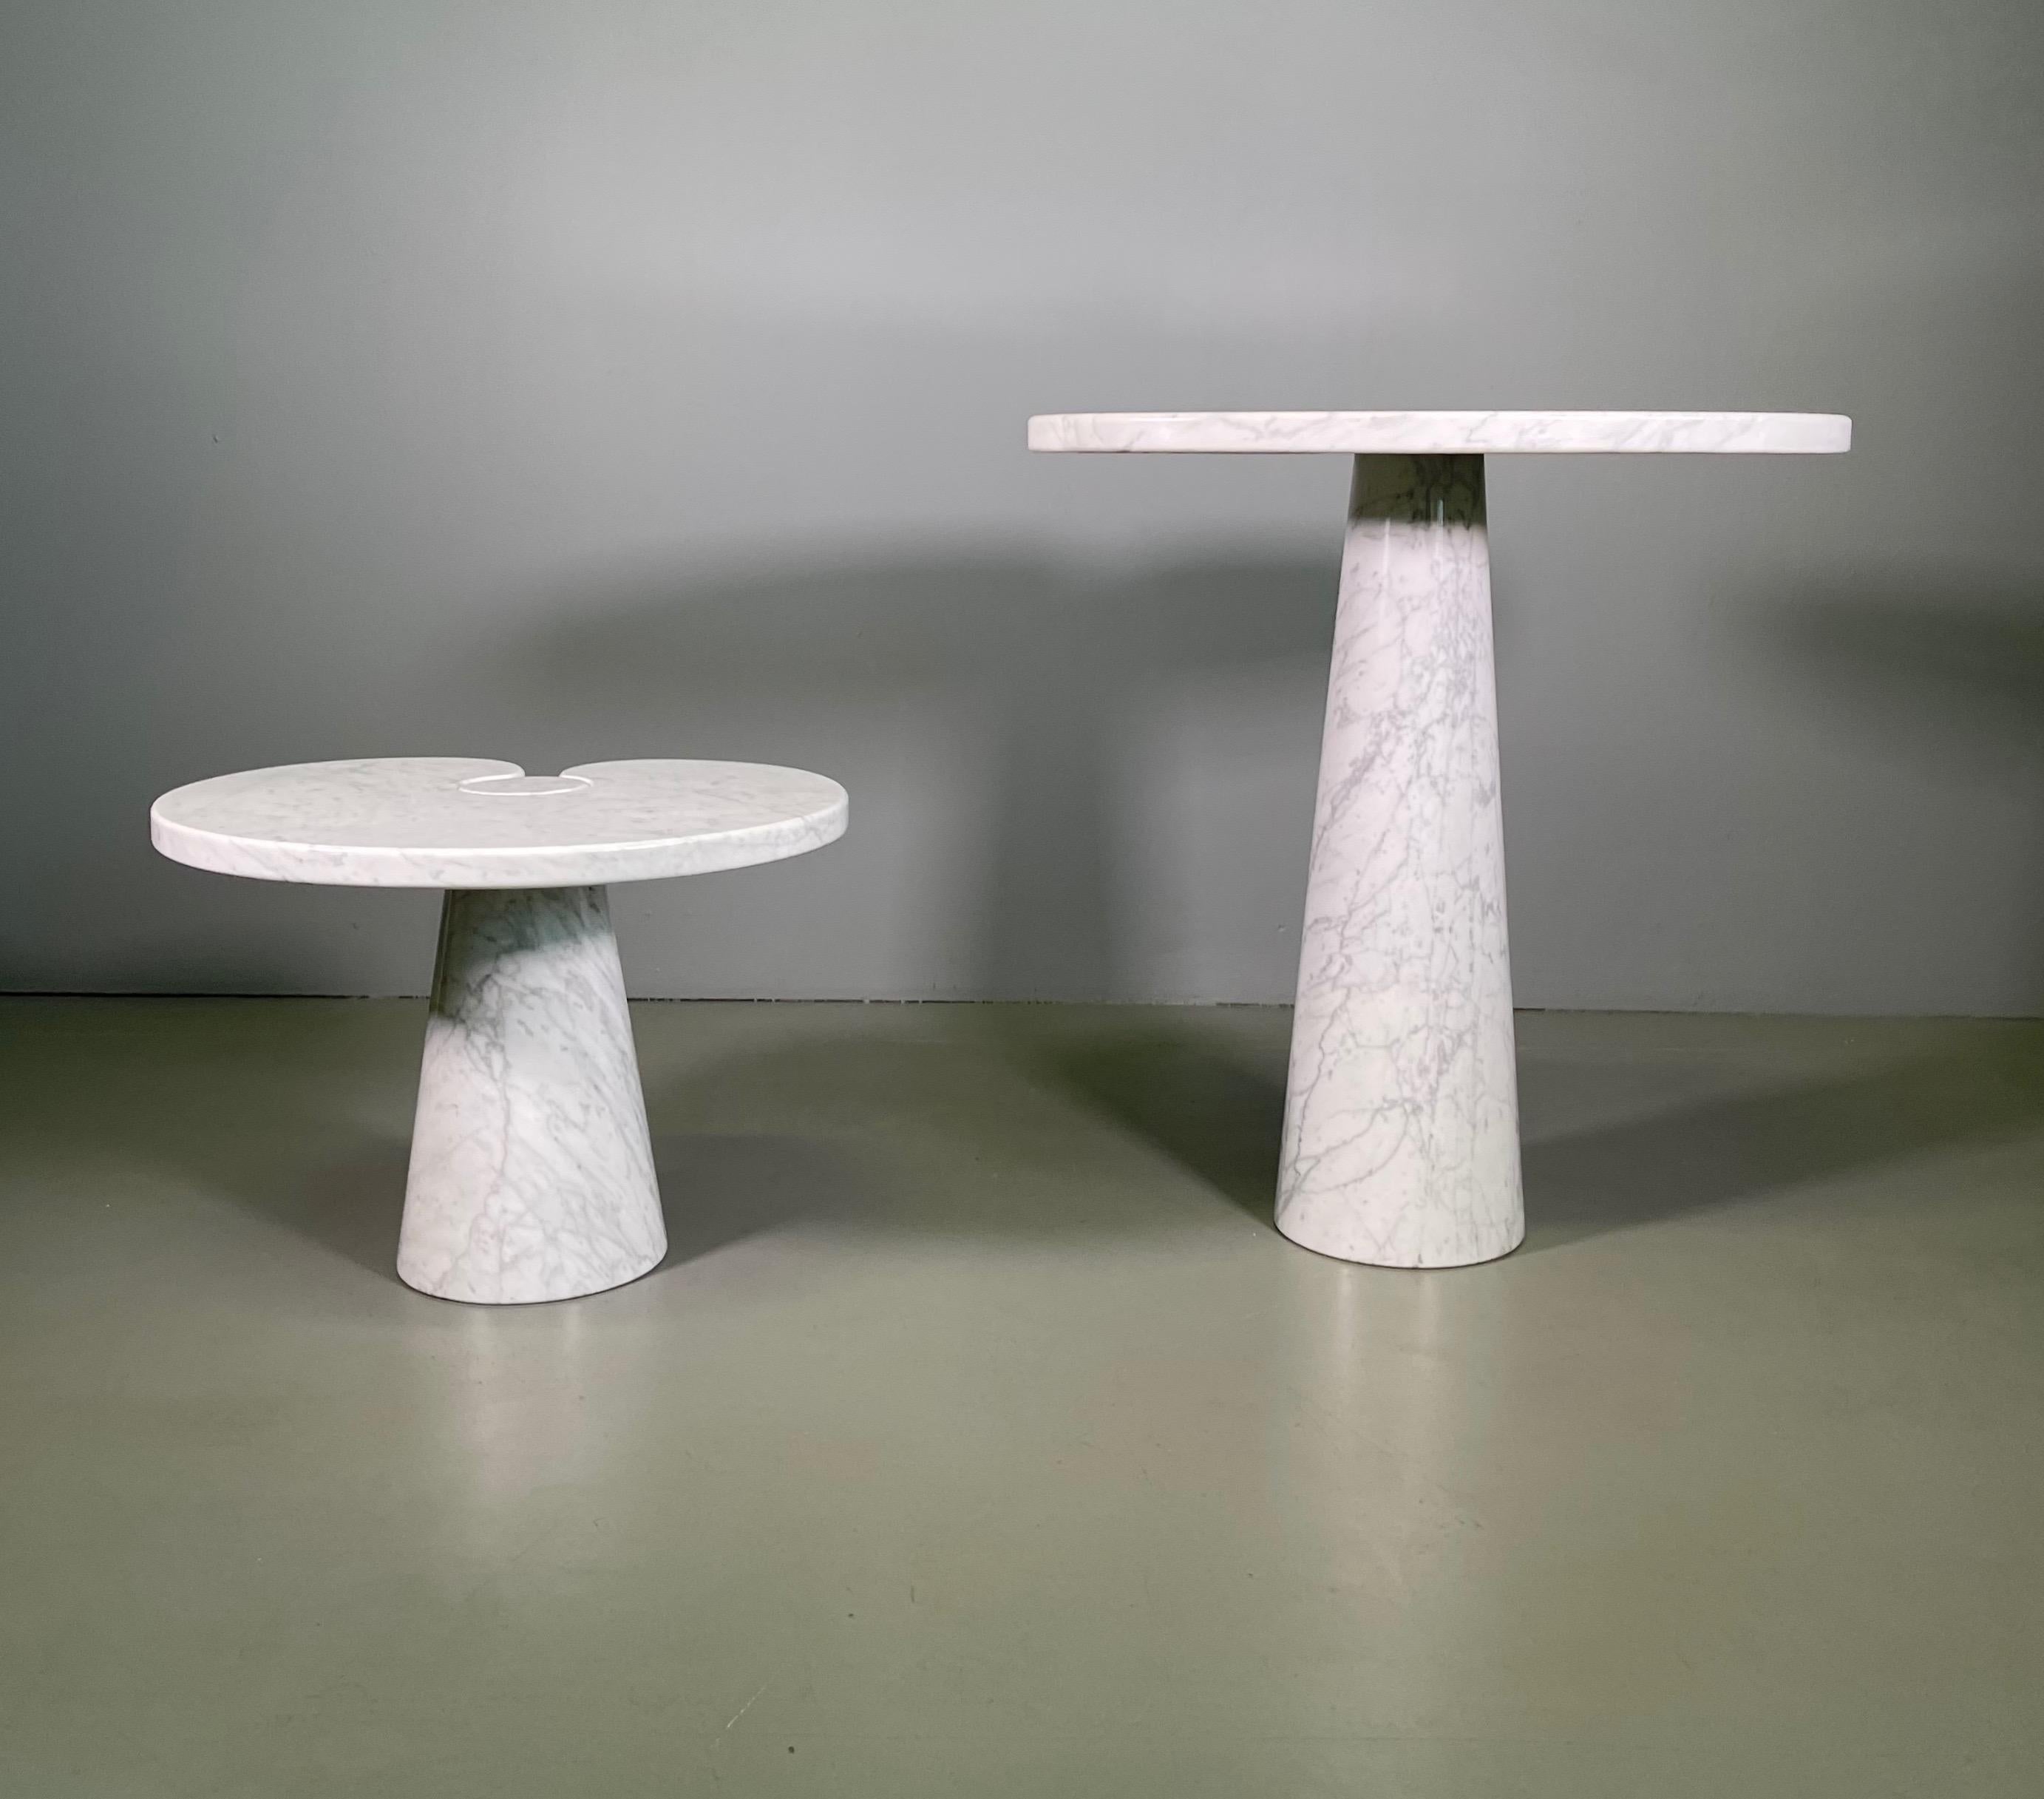 Designed by Angelo Mangiarotti for Skipper from the 'Eros' series, Carrara marble side table with top fitted on conical bases, Italy, 1971. Original Skipper label.
Measures: The big H 72 cm x W 66 cm x D 45 cm
The little H 40 cm x W 55 cm x D 46